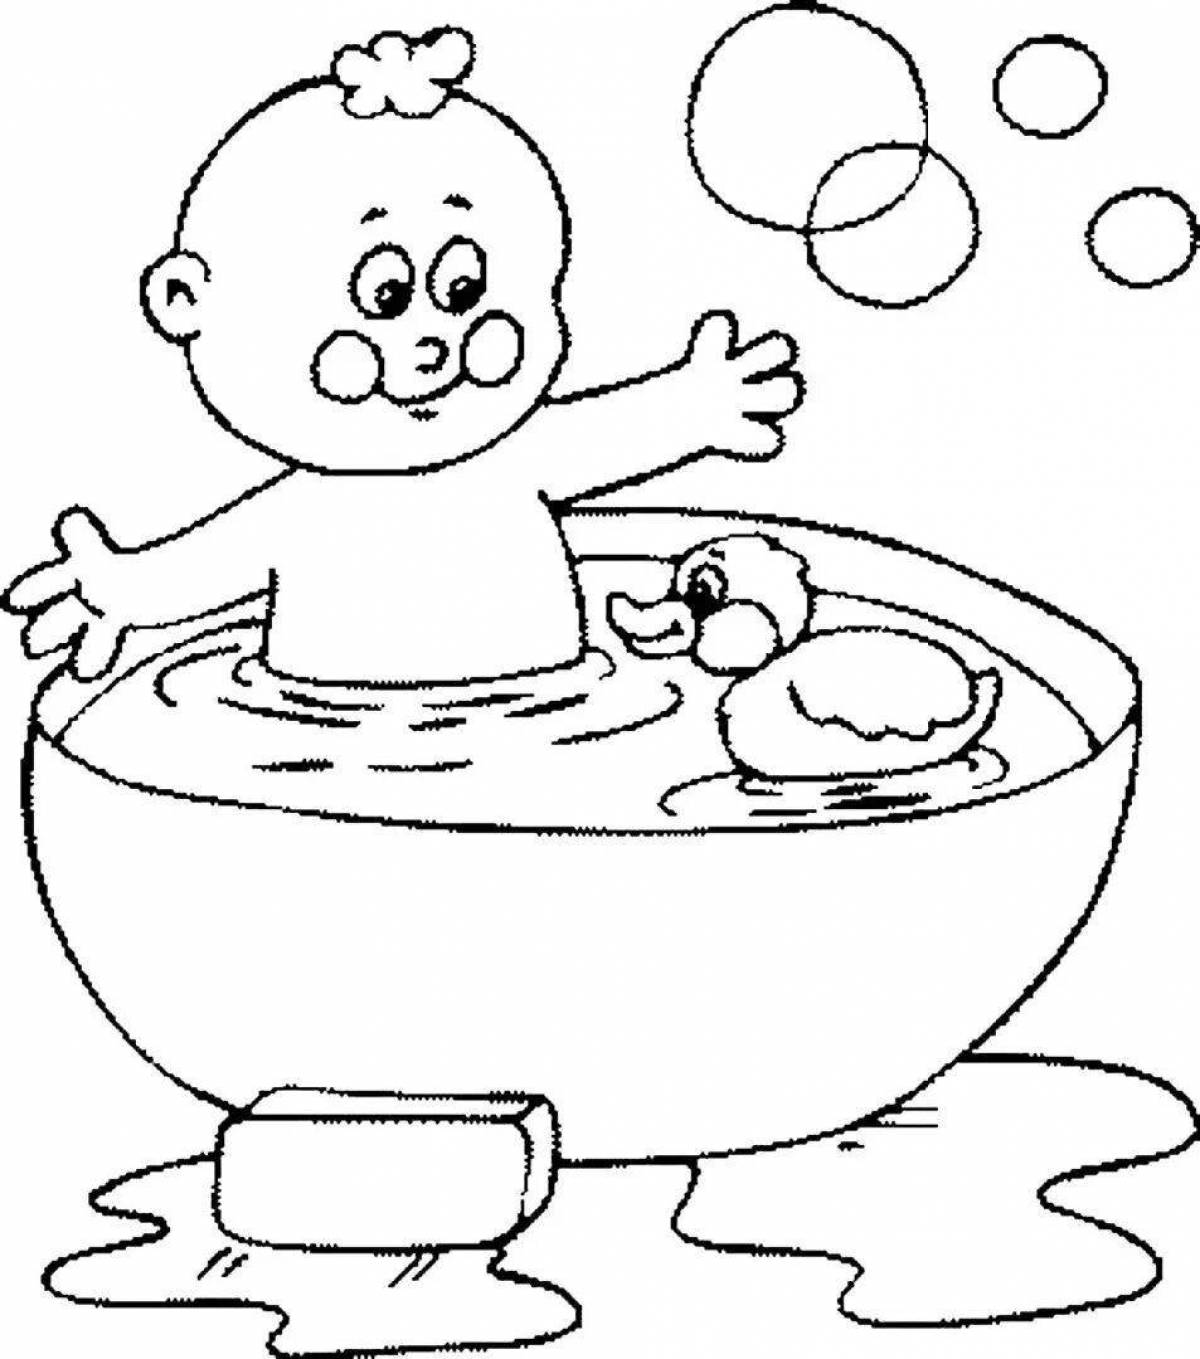 Hygiene and health fun coloring book